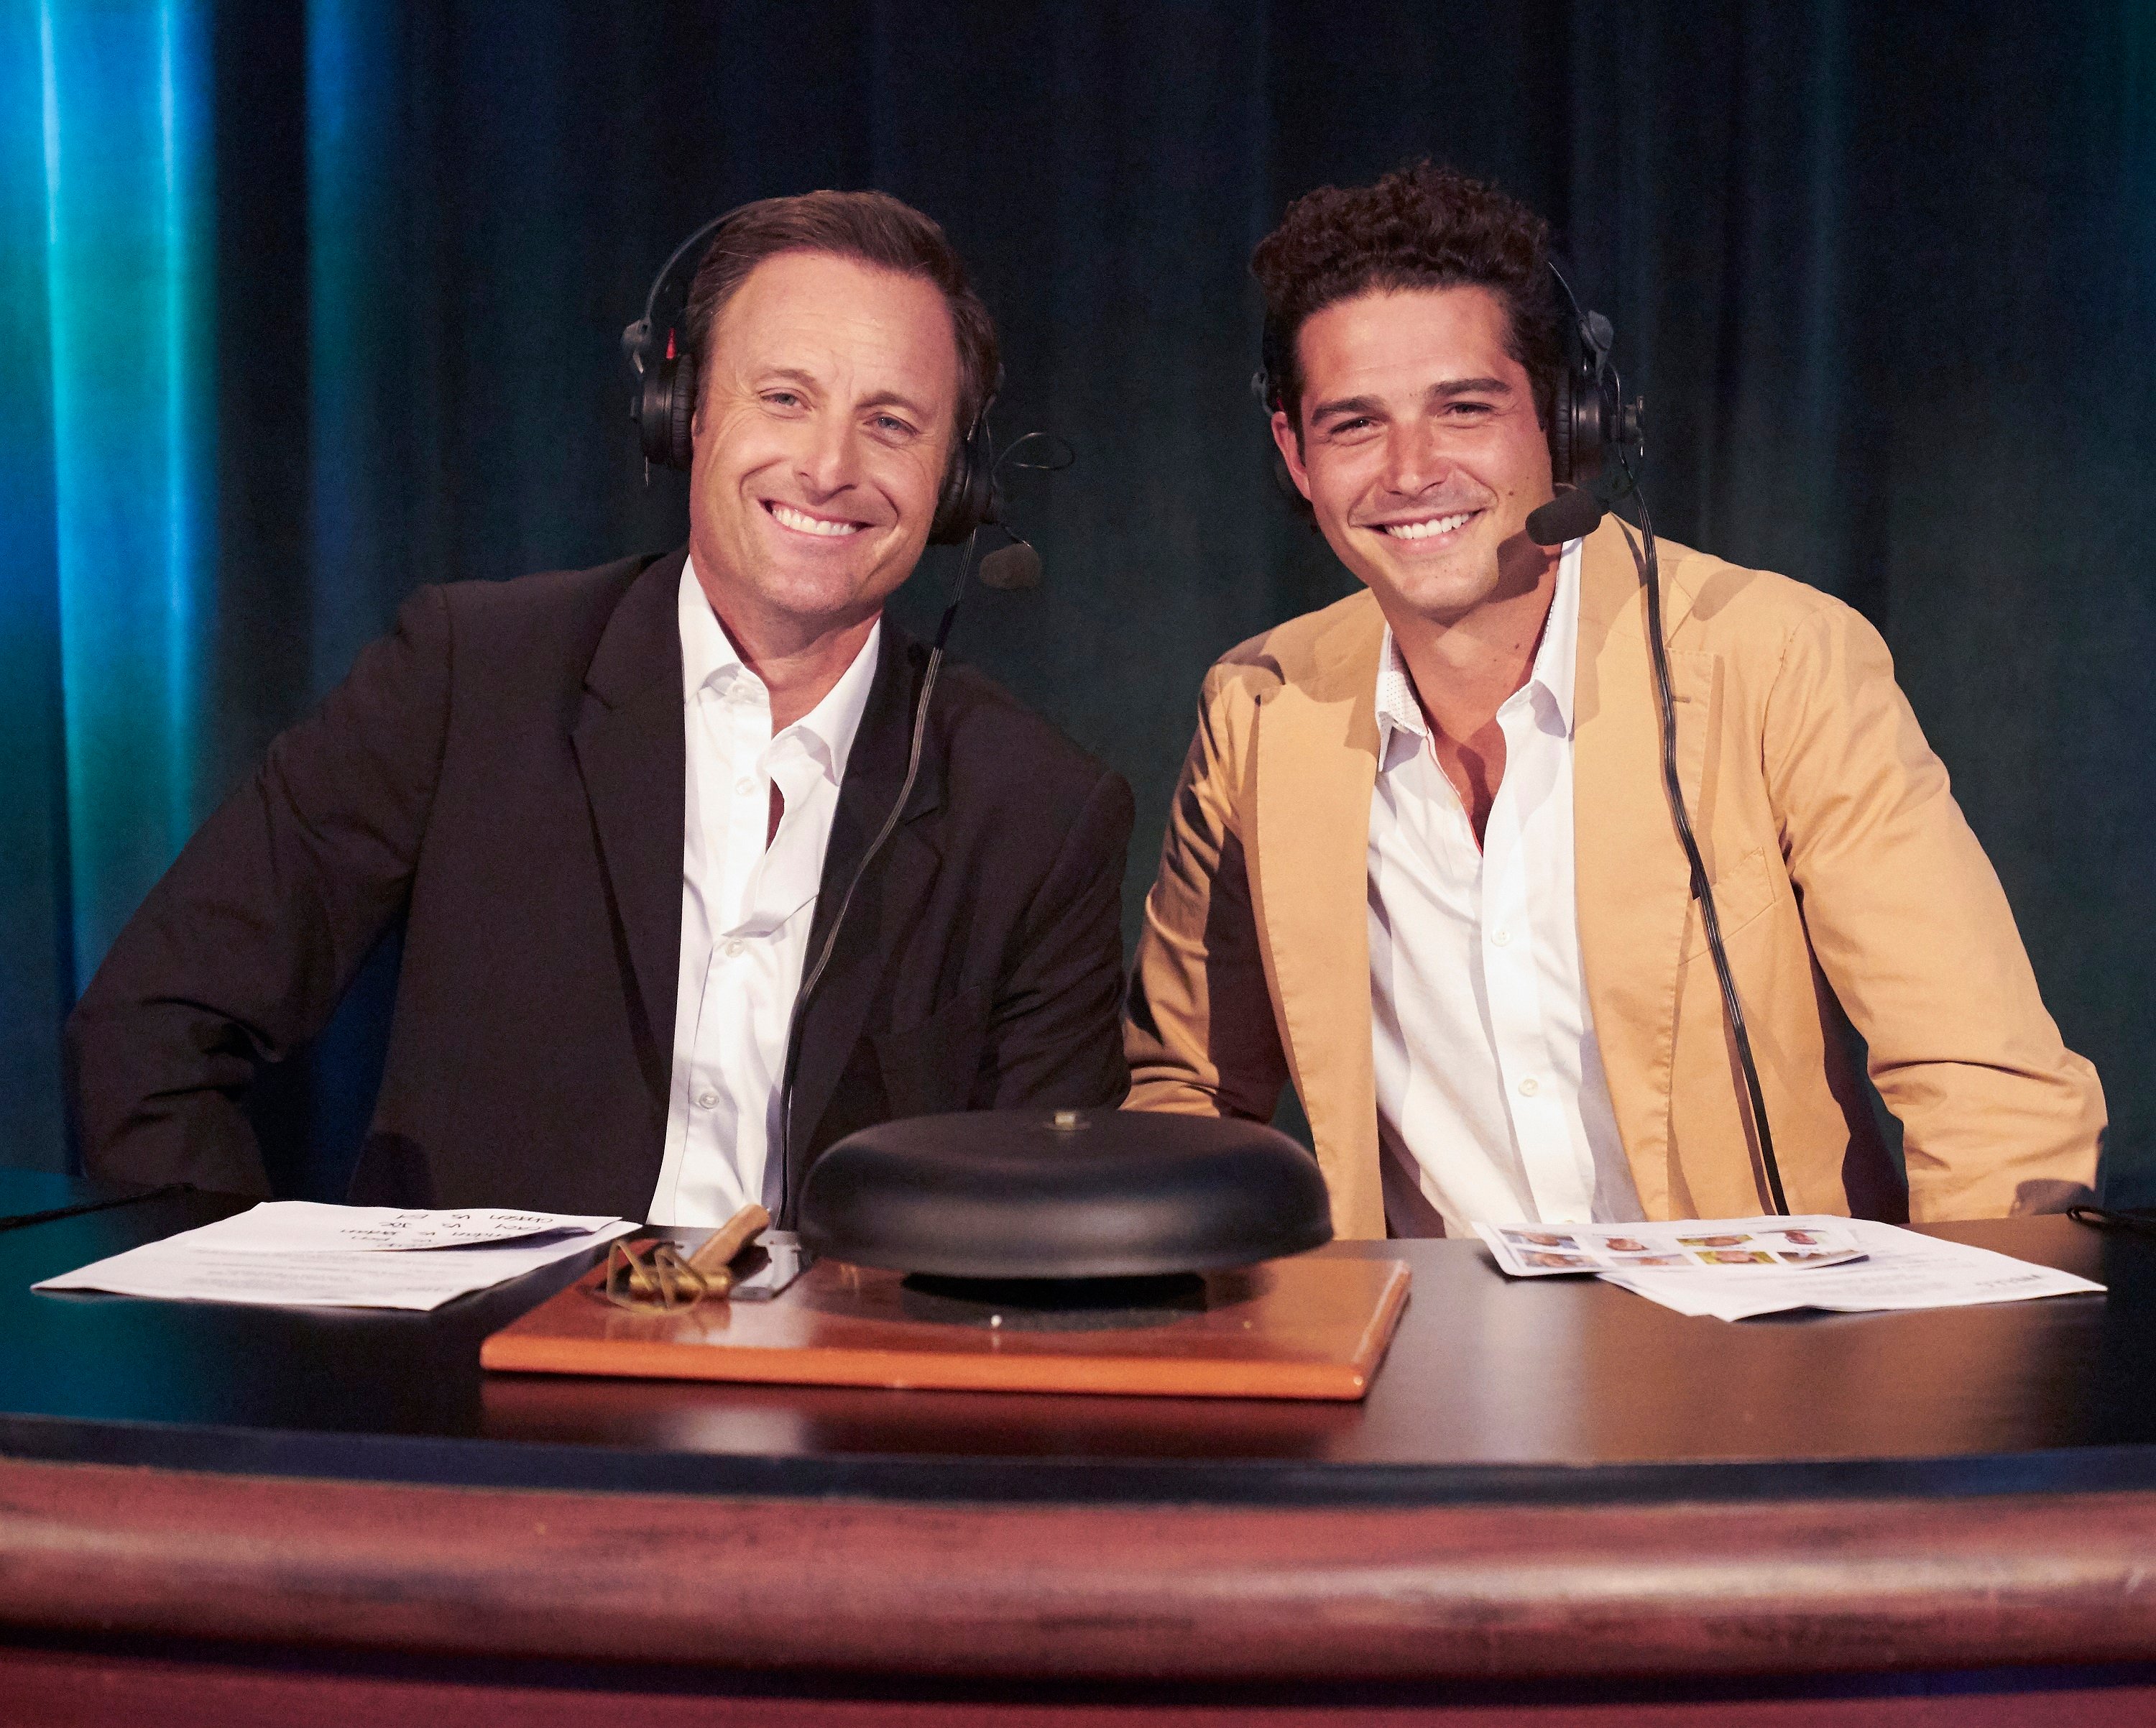 'The Bachelorette' host Chris Harrison with guest Wells Adams